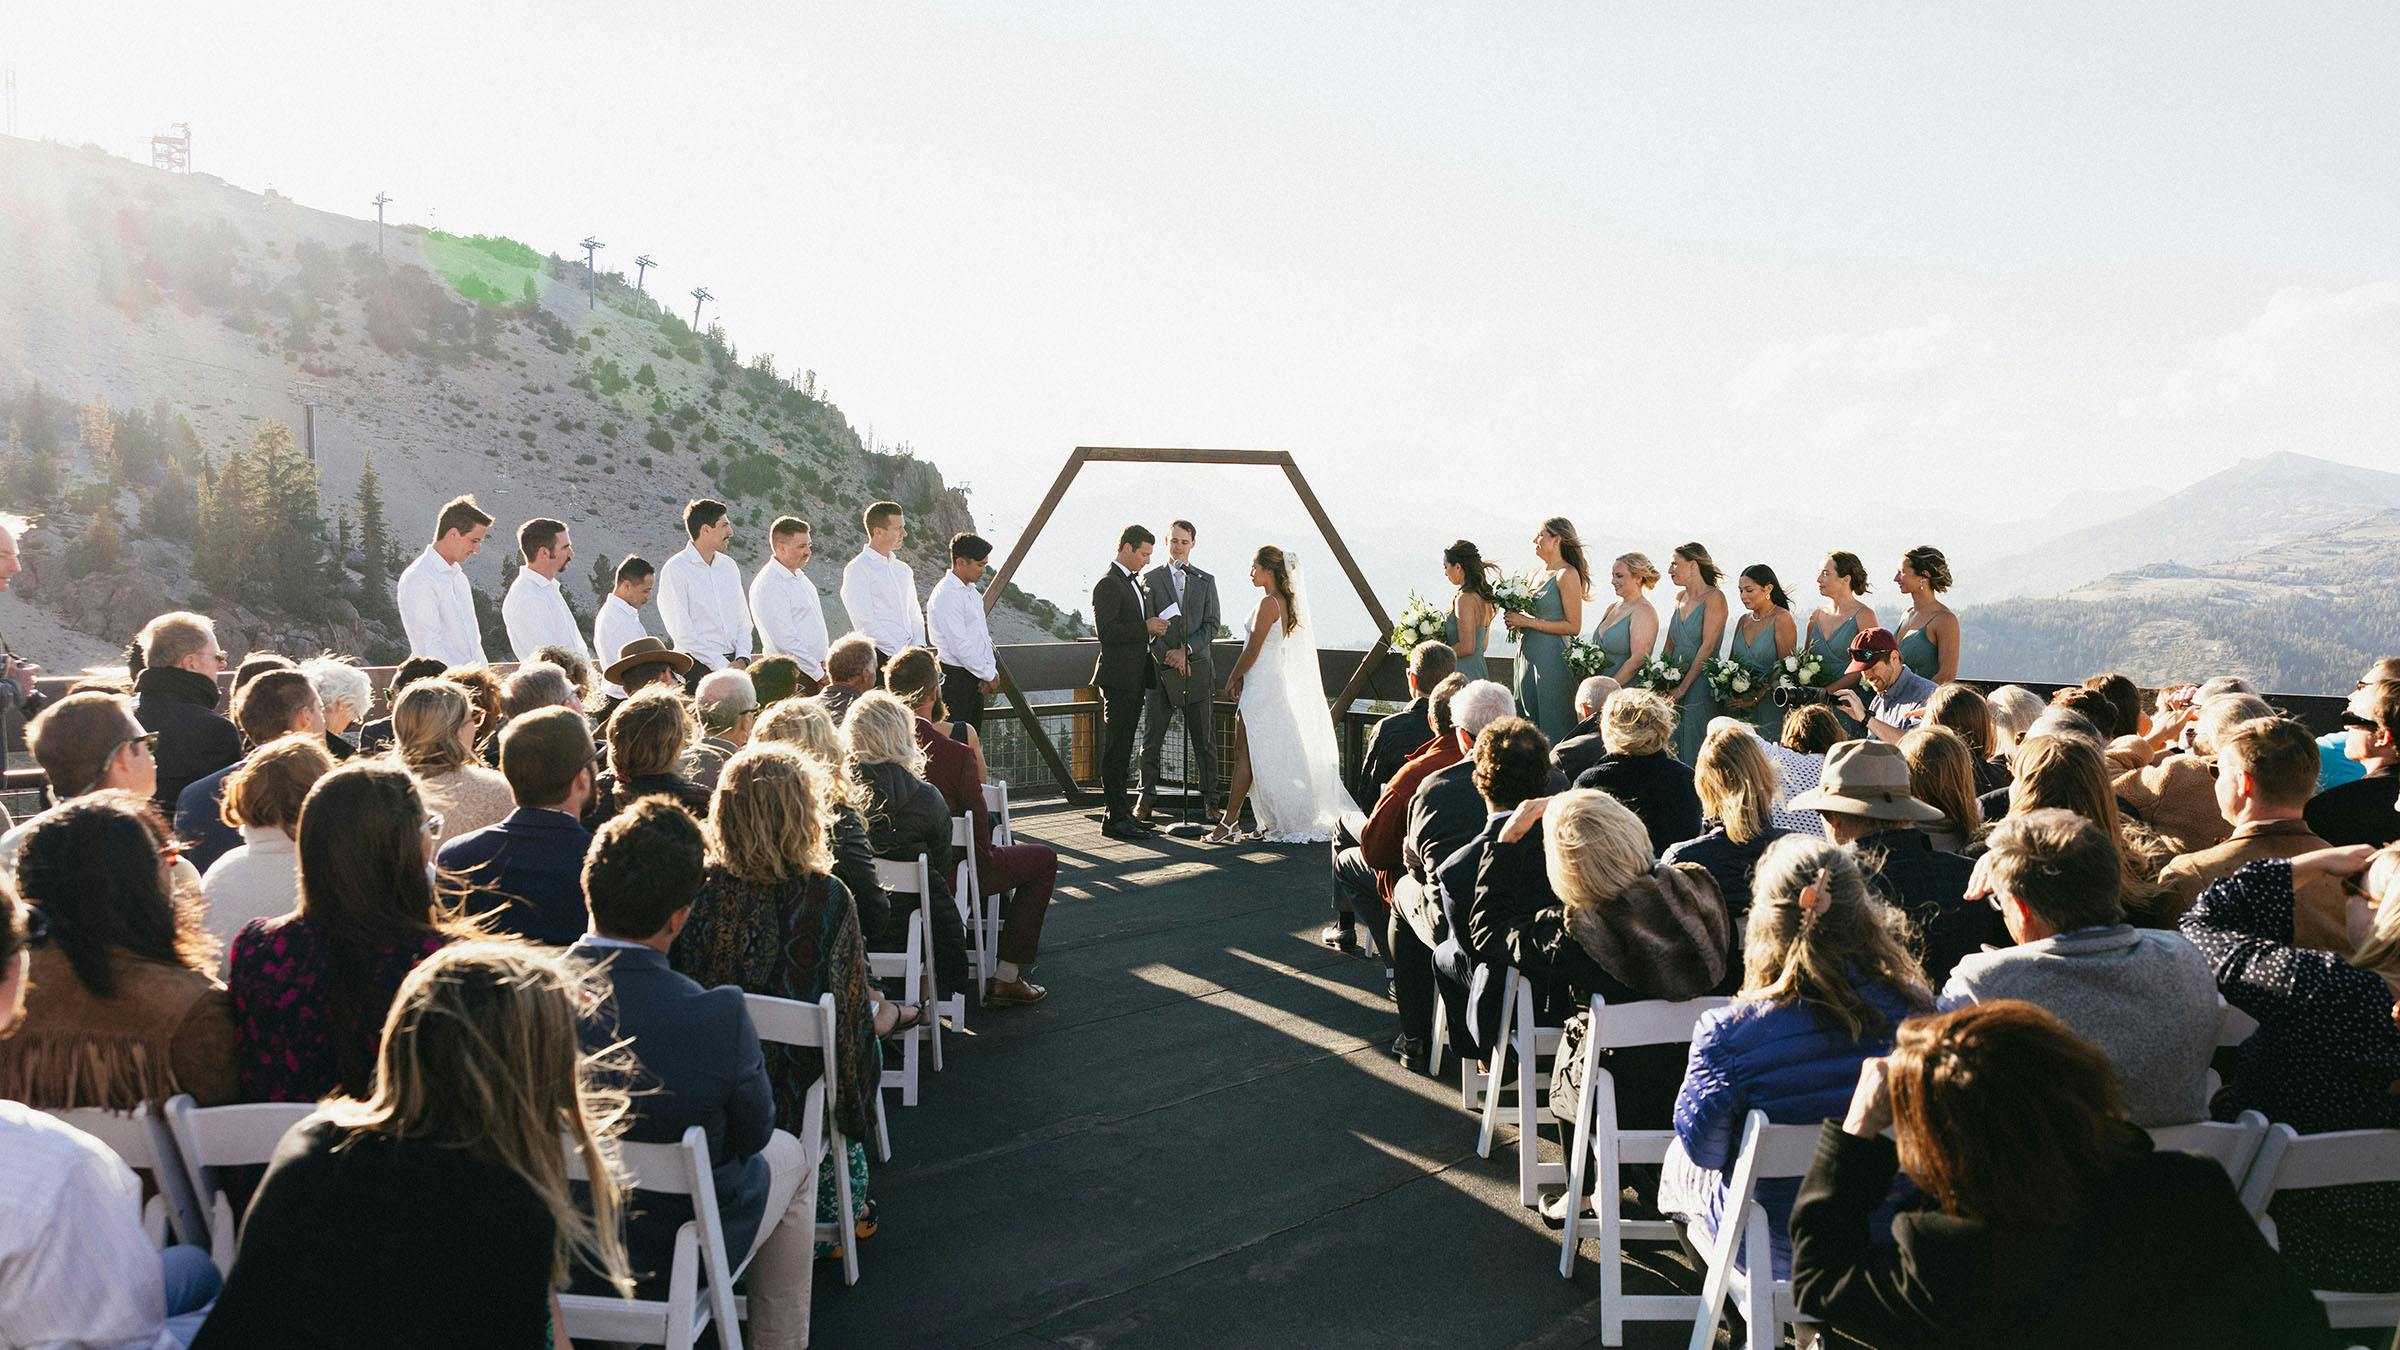 Outdoor wedding ceremony at McCoy Station on Mammoth Mountain